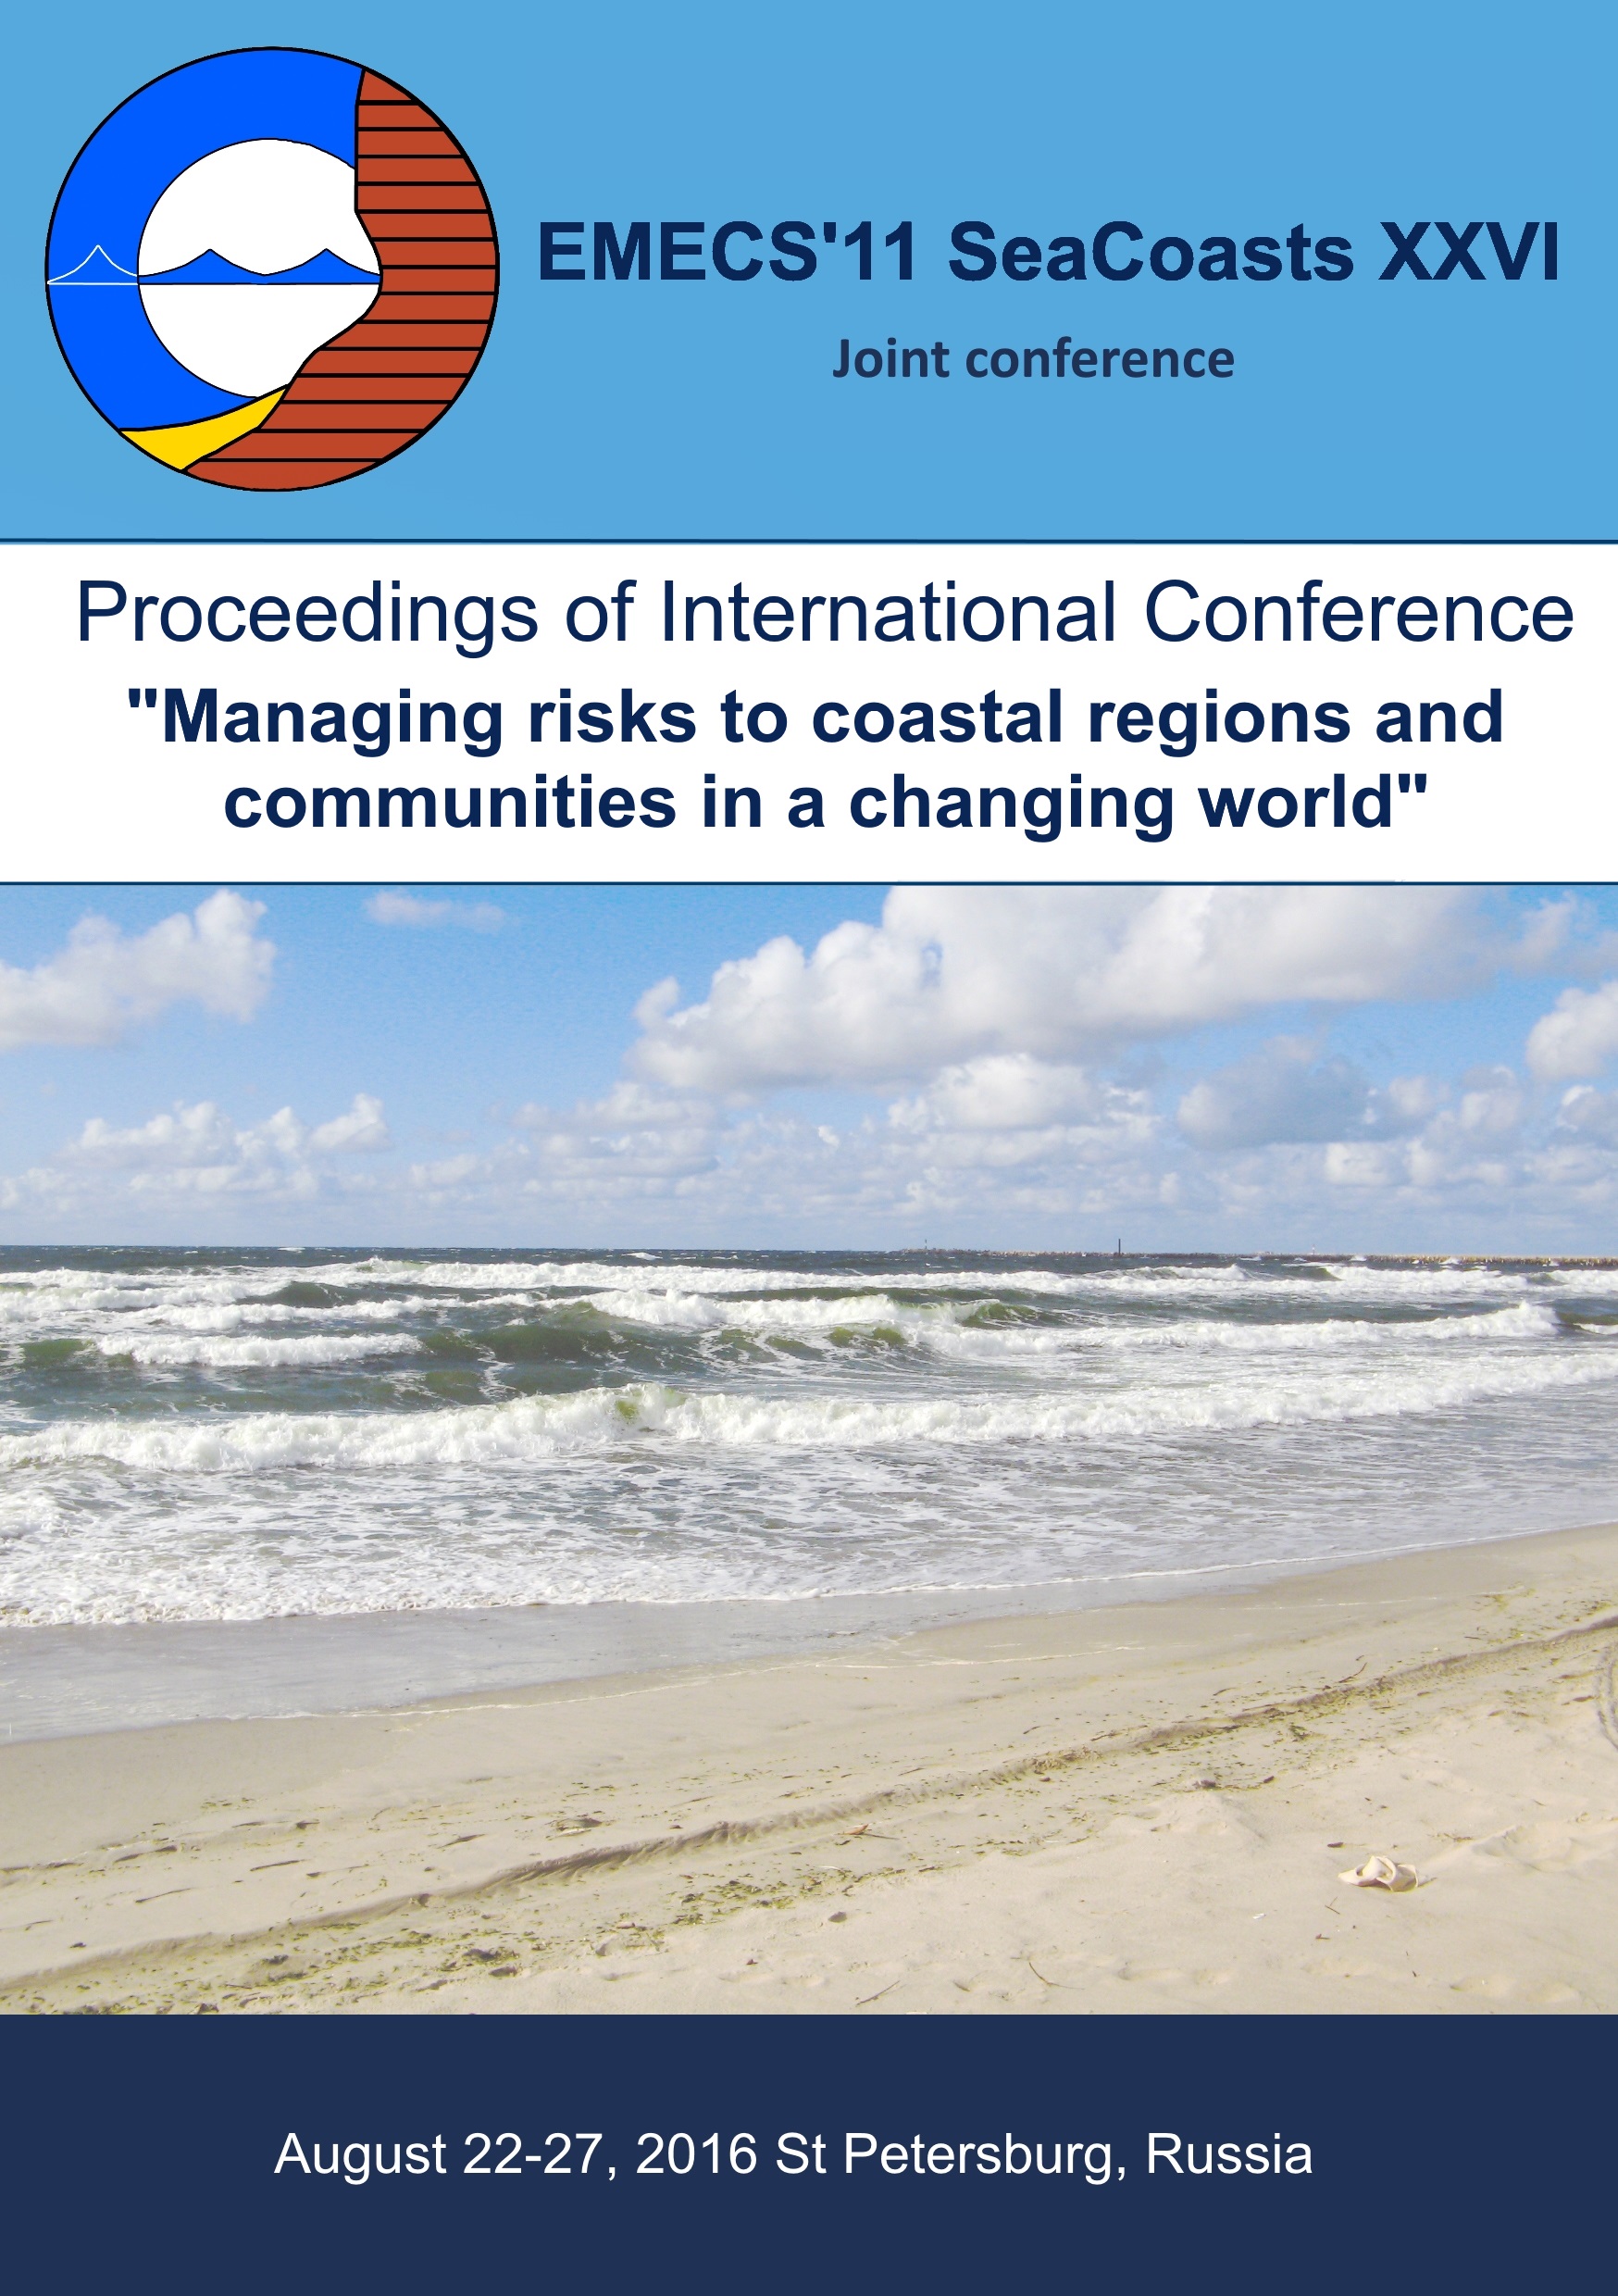                         COASTAL VULNERABILITY ASSESSMENT: AN INTEGRATED FRAMEWORK TO ANALYZE LOCAL DECISION MAKING AND ADAPTATION TO SEA-LEVEL RISE IN SANTOS, SAO PAULO-BRAZIL
            